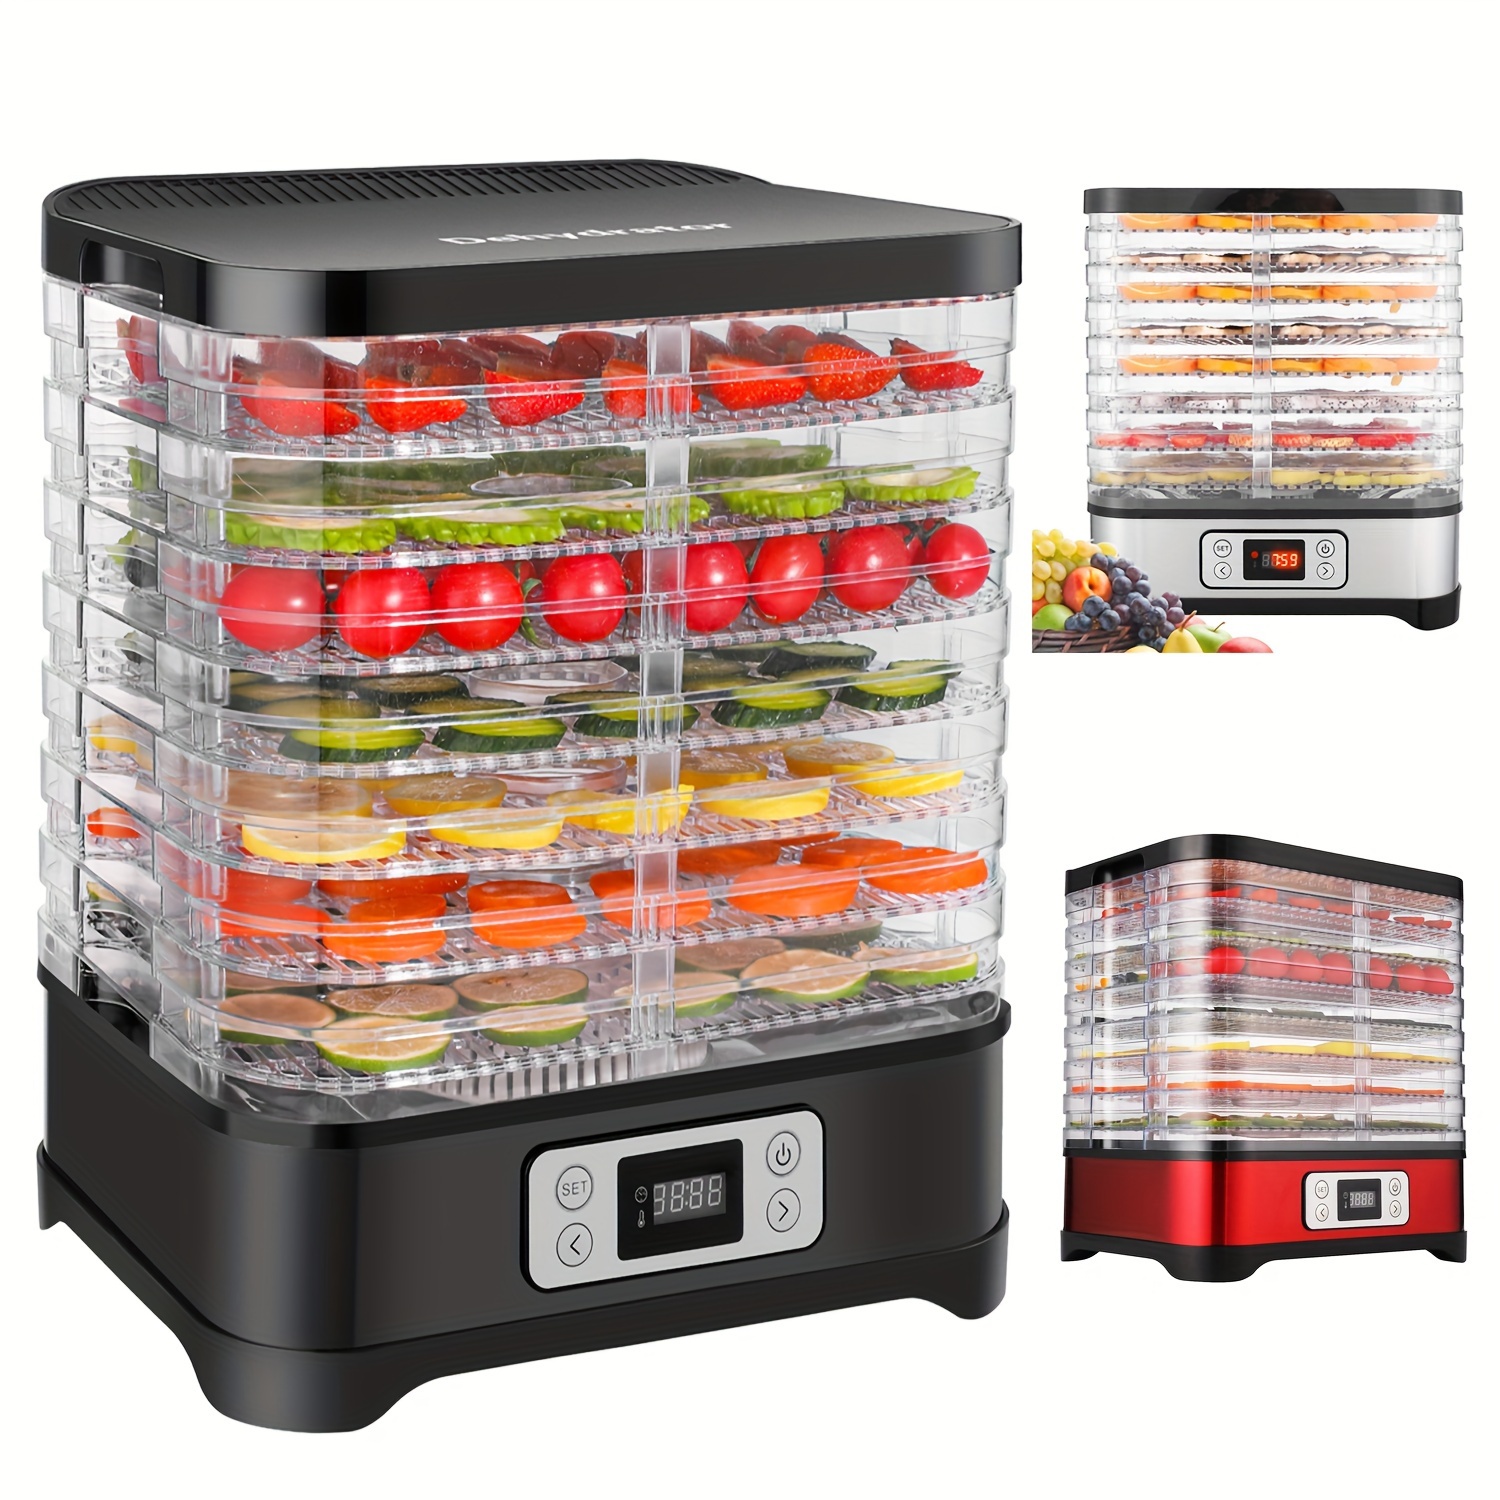 

Food Dehydrator Machine, Fruit With 8-trays, Digital Timer And Temperature Control(95ºf-158ºf) For Food, Jerky, Meat, Fruit, Herbs And Vegetable, 400 Watt, Bpa Free, Silver/red/black